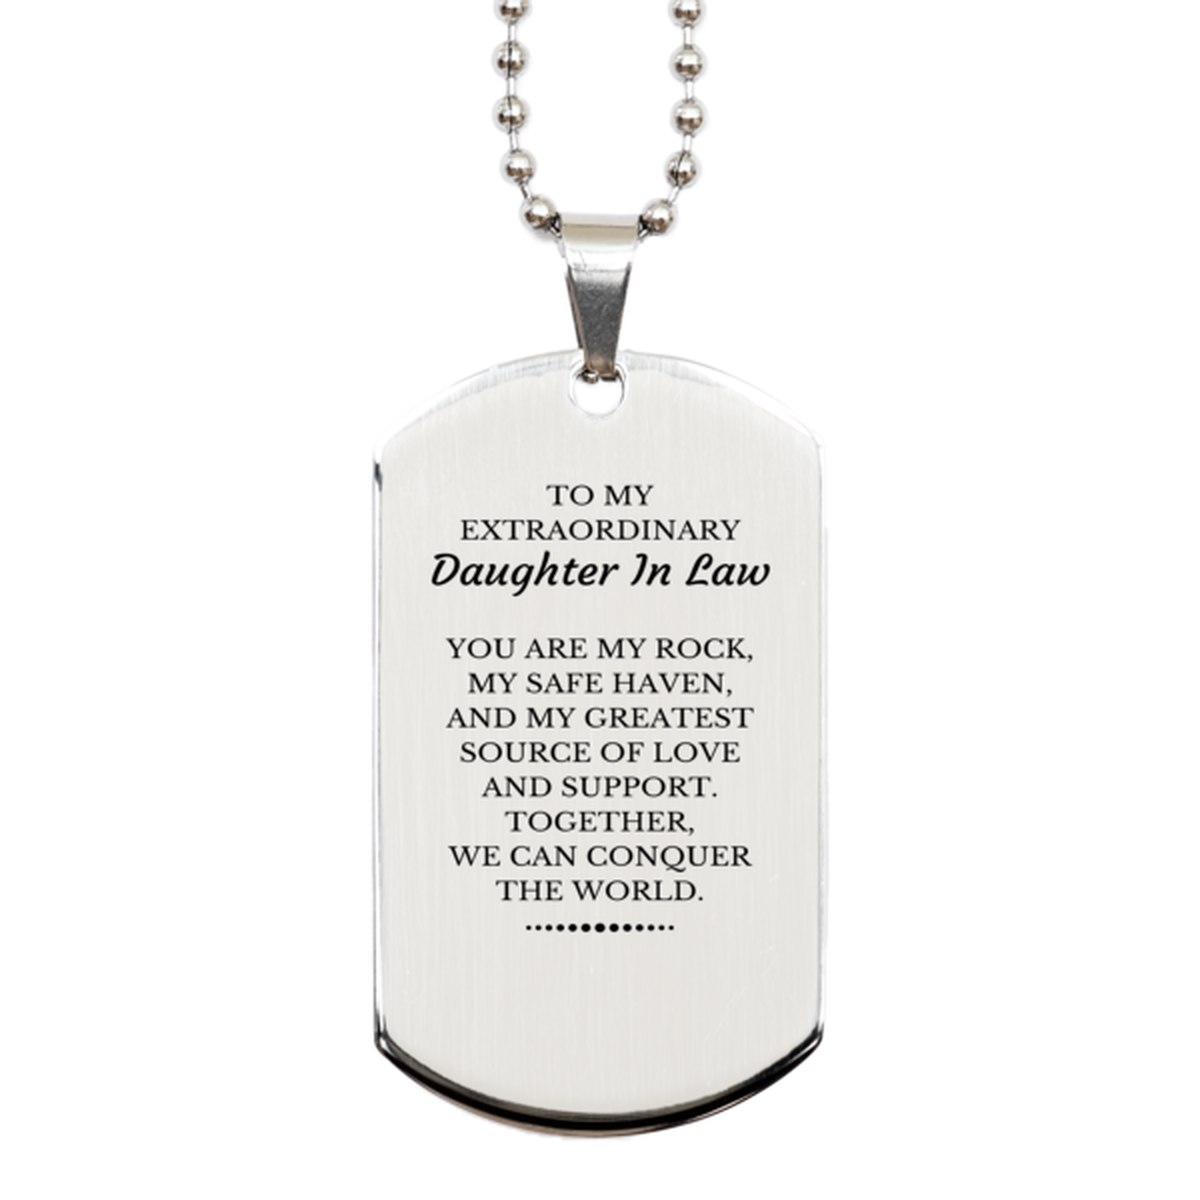 To My Extraordinary Daughter In Law Gifts, Together, we can conquer the world, Birthday Silver Dog Tag For Daughter In Law, Christmas Gifts For Daughter In Law